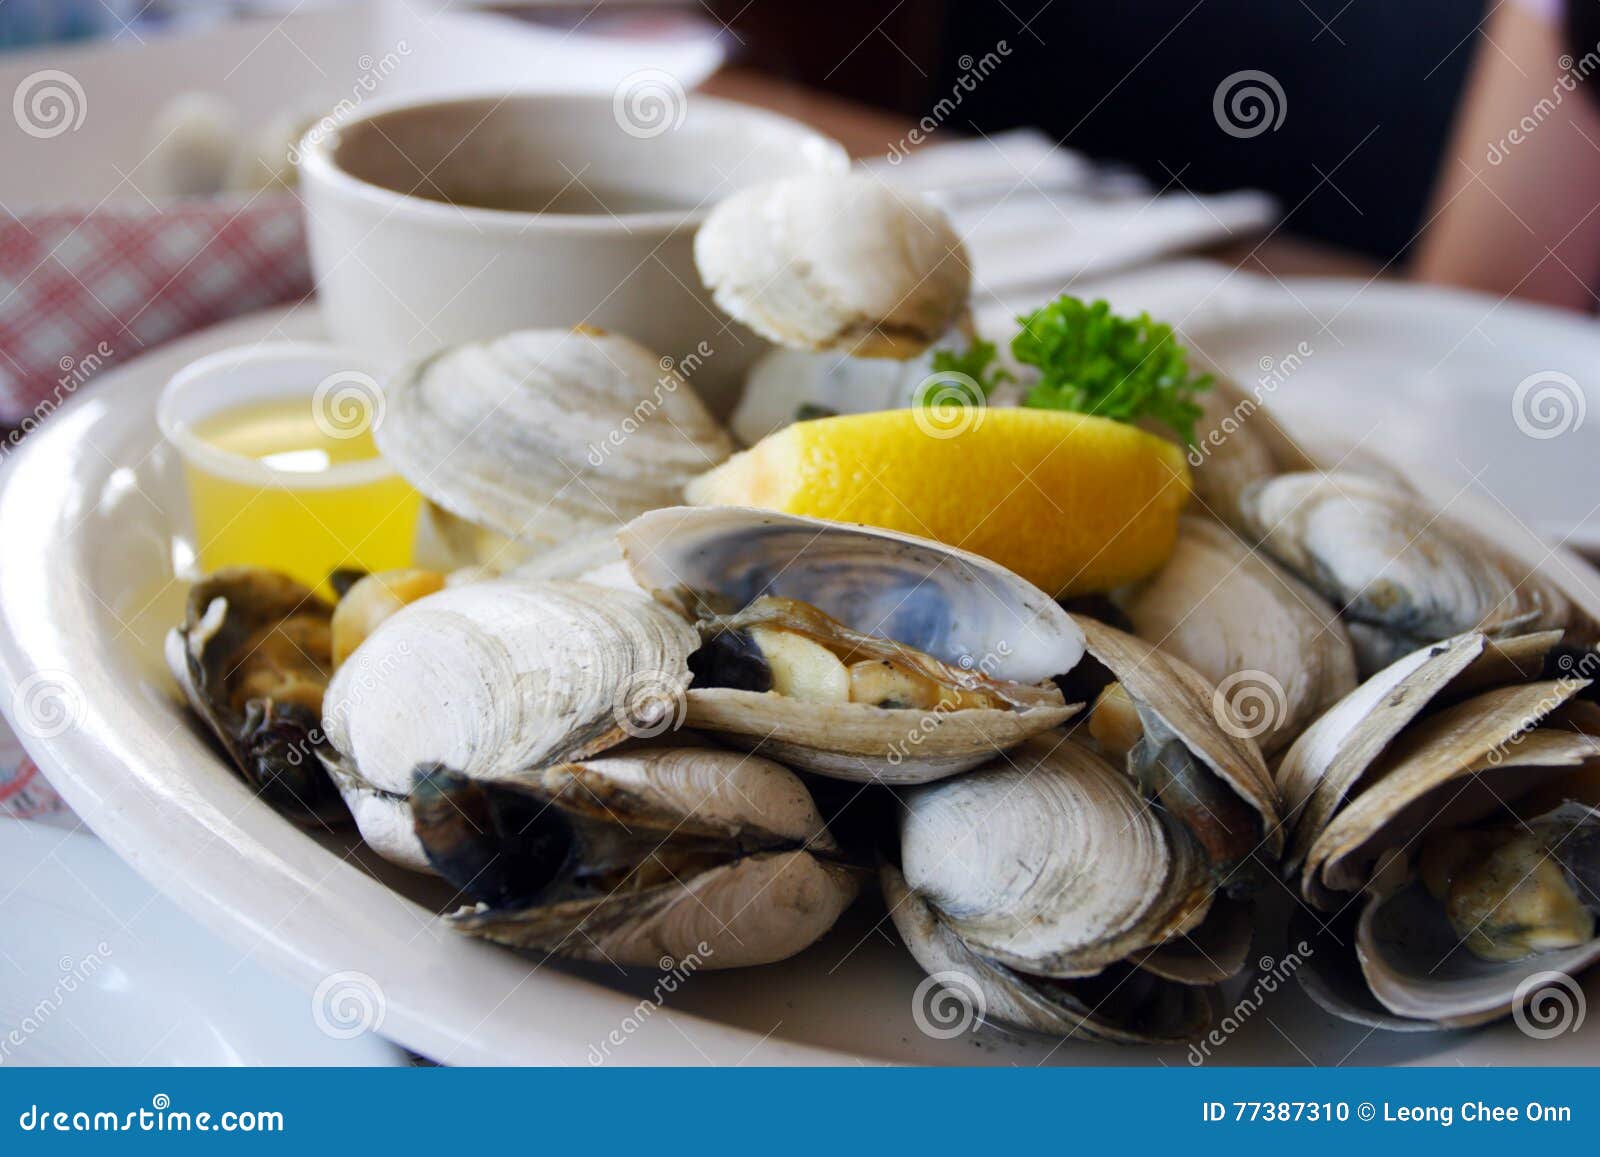 bowl of delicious fresh steamer clams with lemon and broth